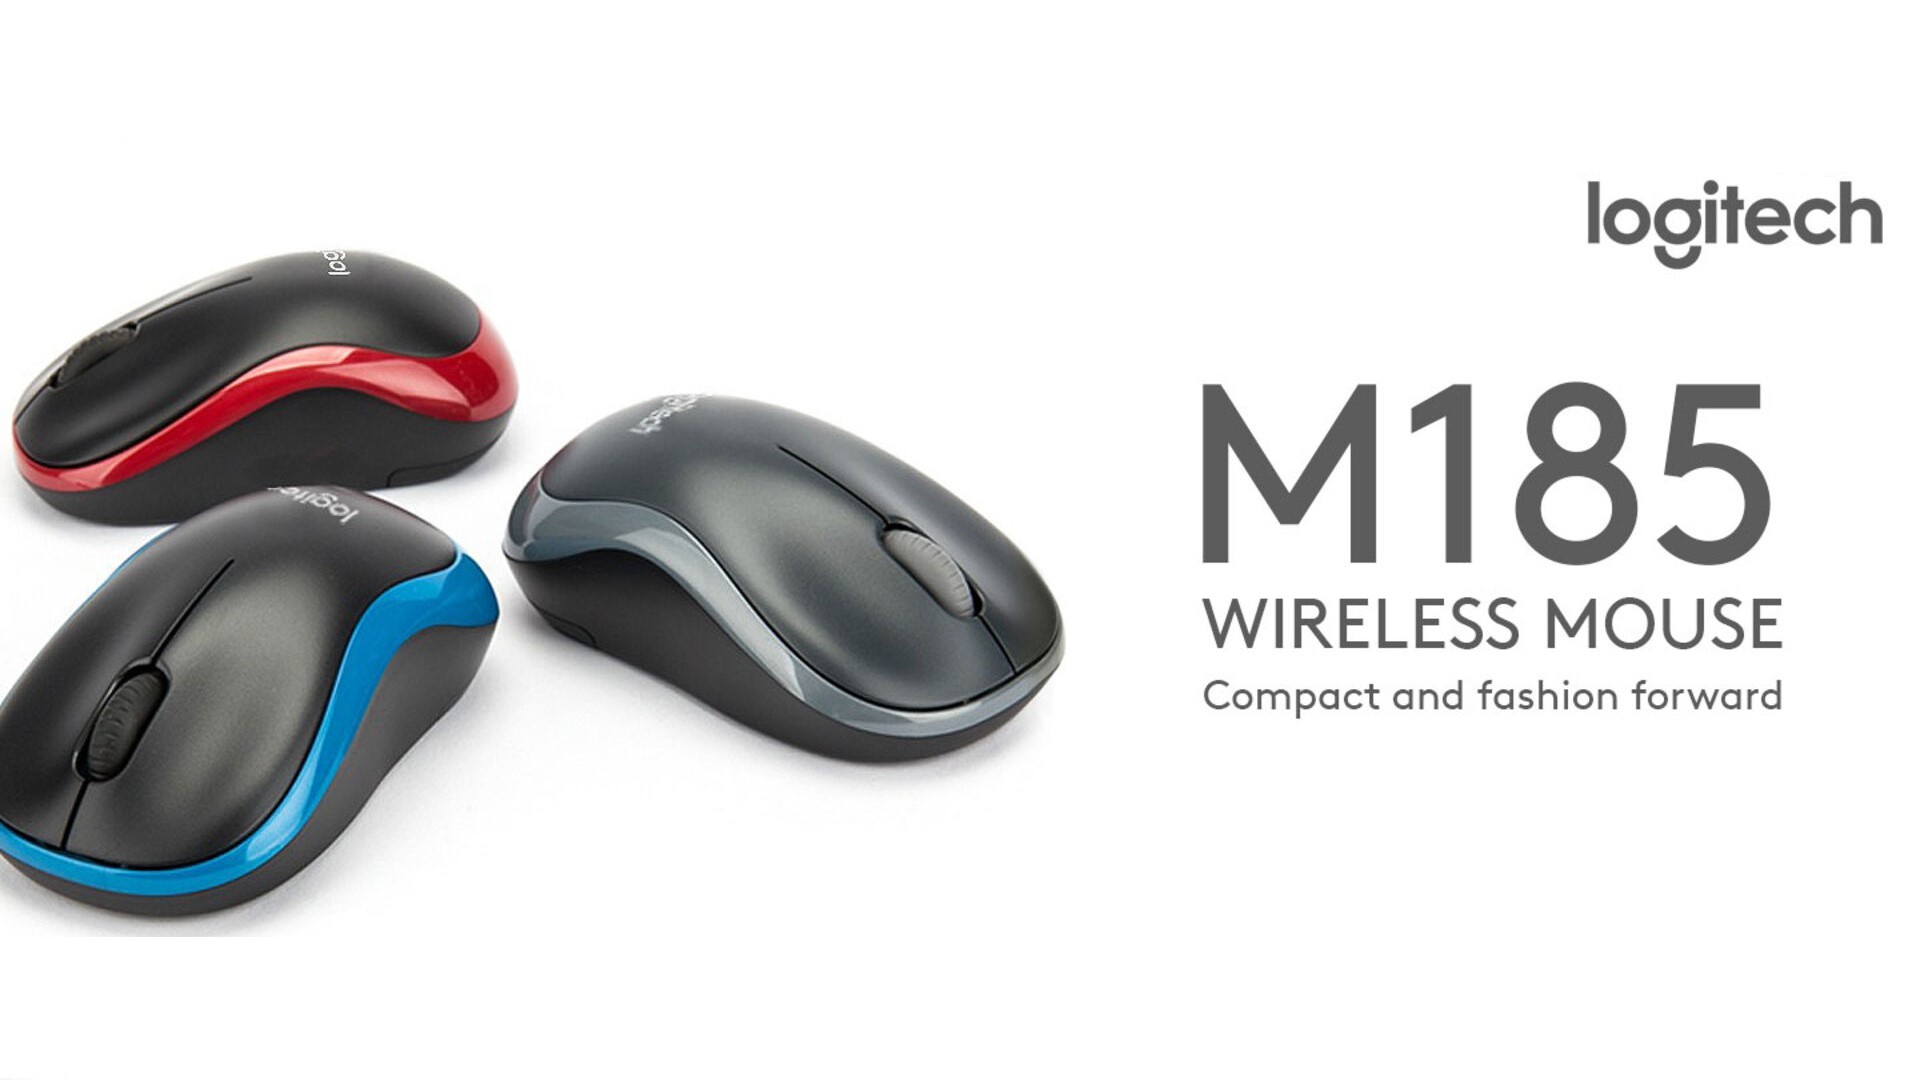 Design of the M185 mouse